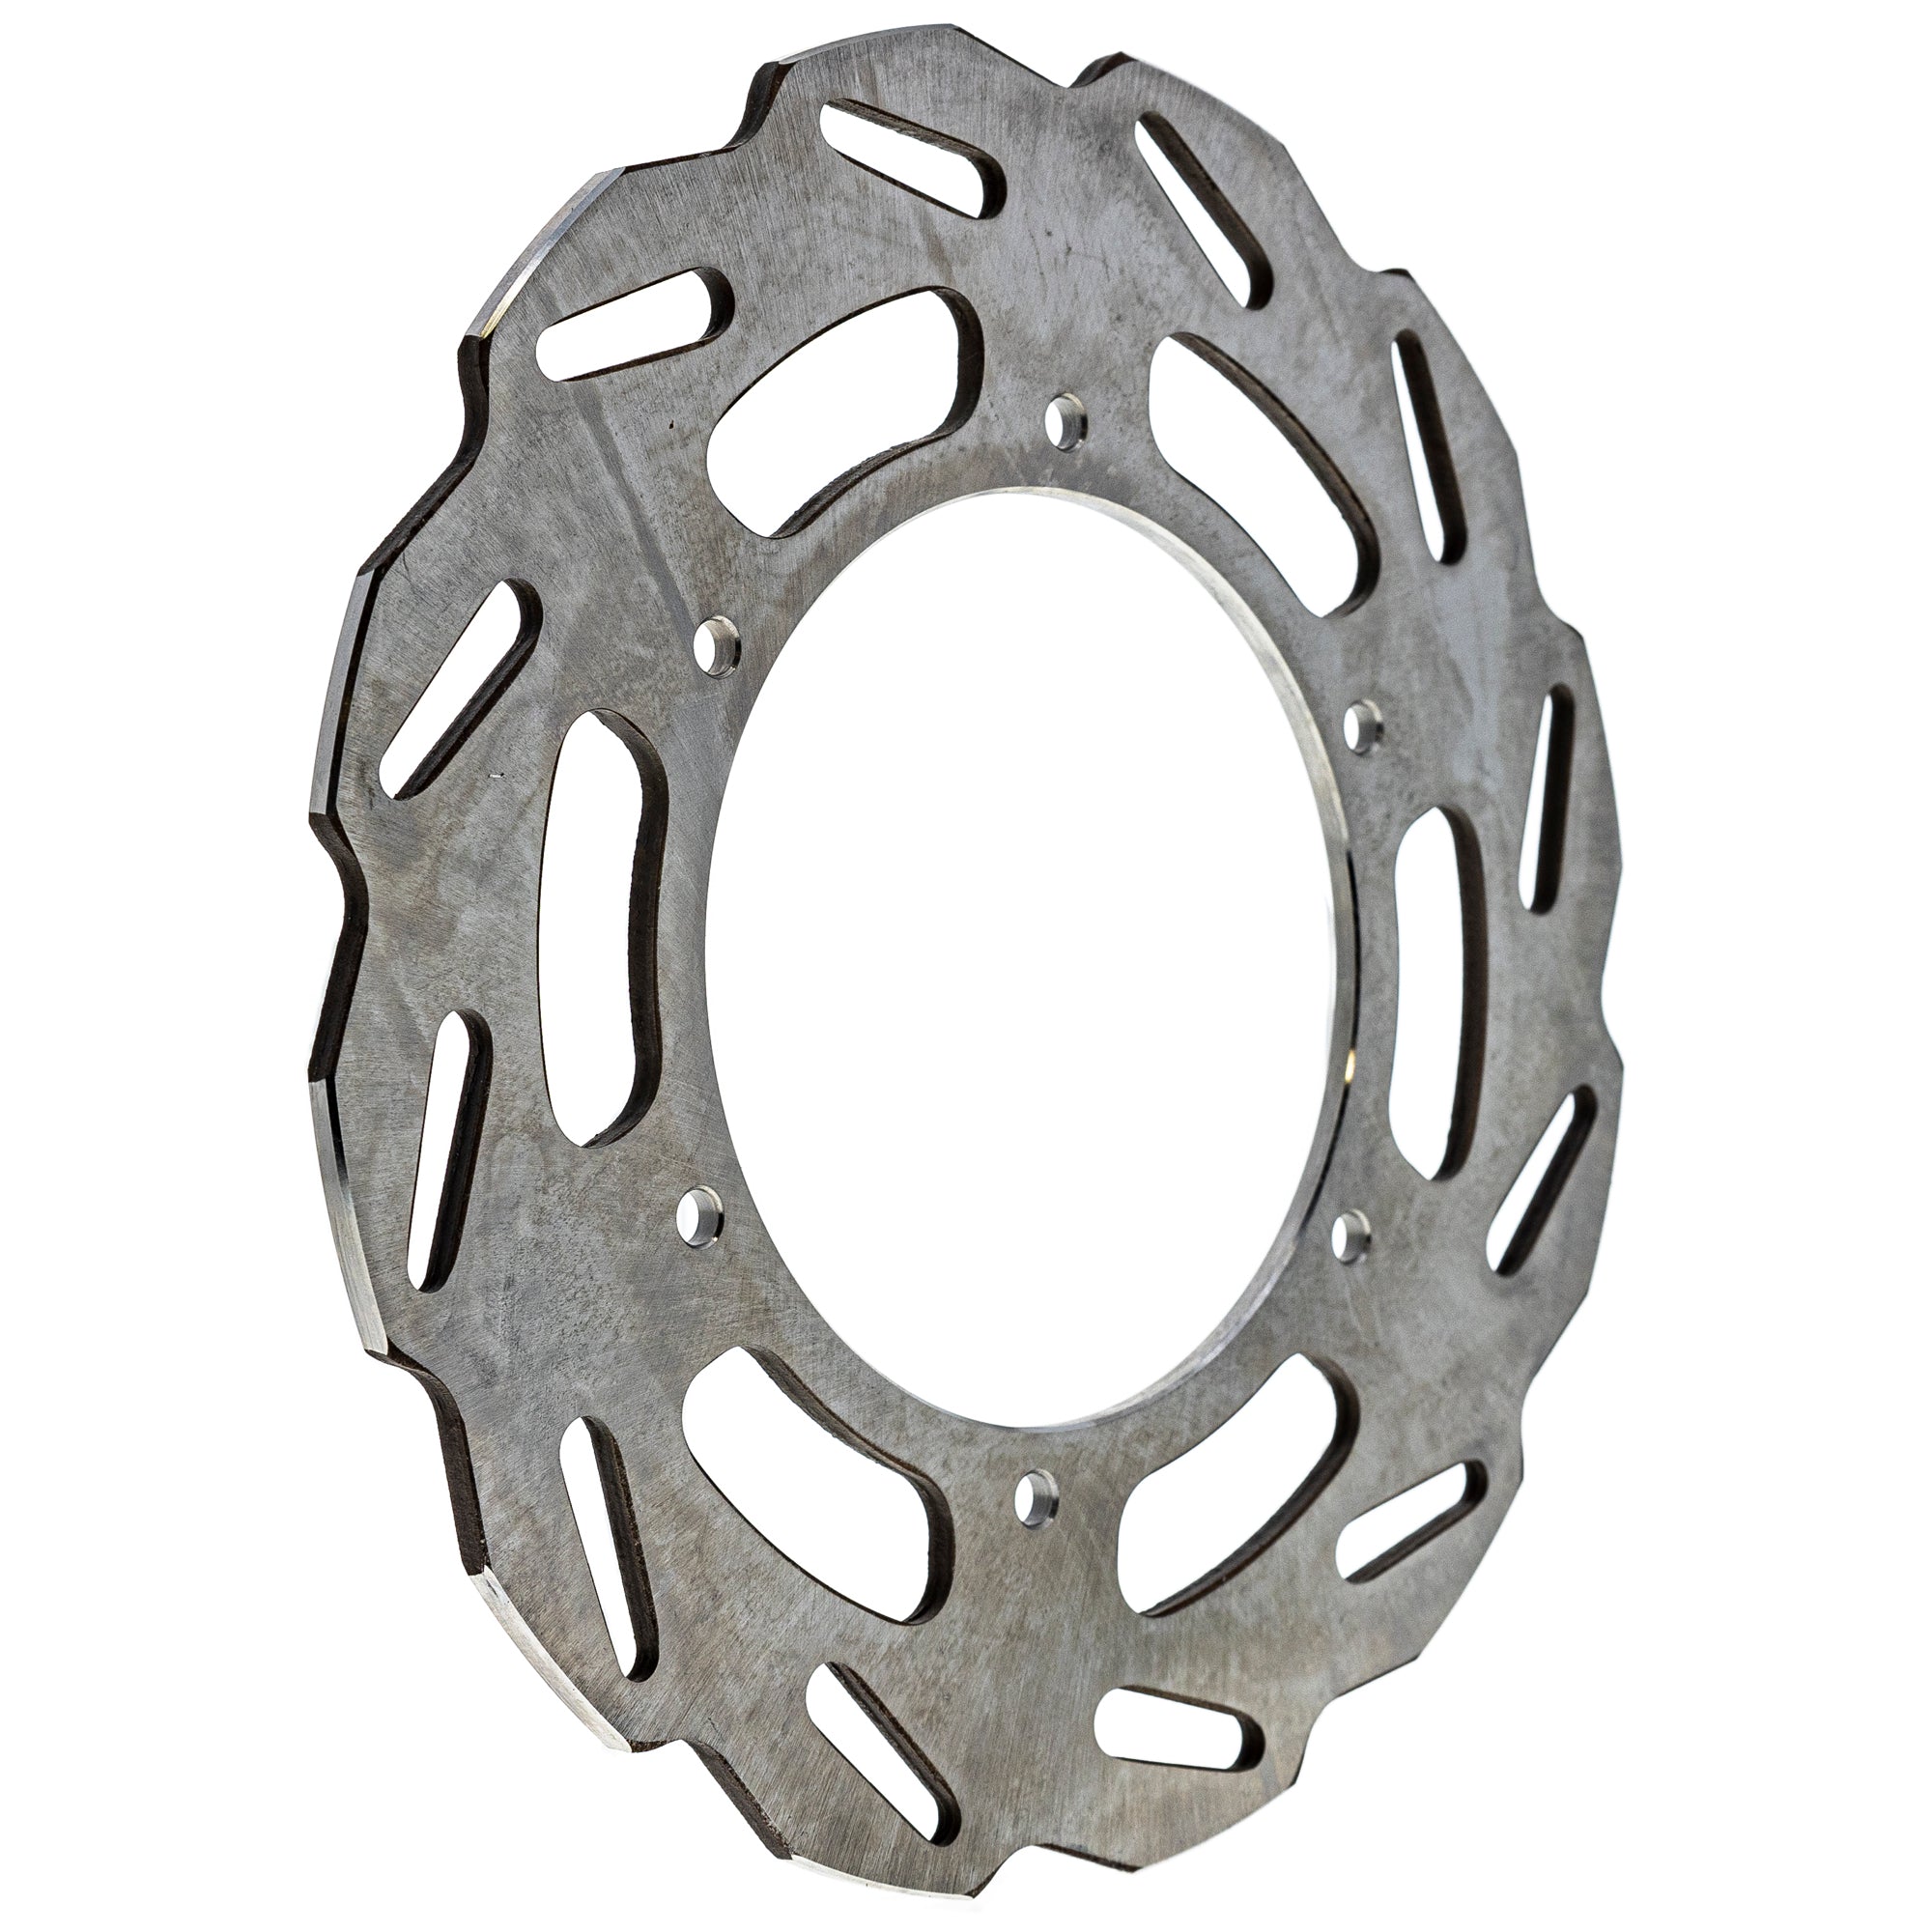 Rear Brake Rotor For Yamaha 3D7-2582W-02-00 3D7-2582W-01-00 3D7-2581T-12-00 3D7-2581T-11-00